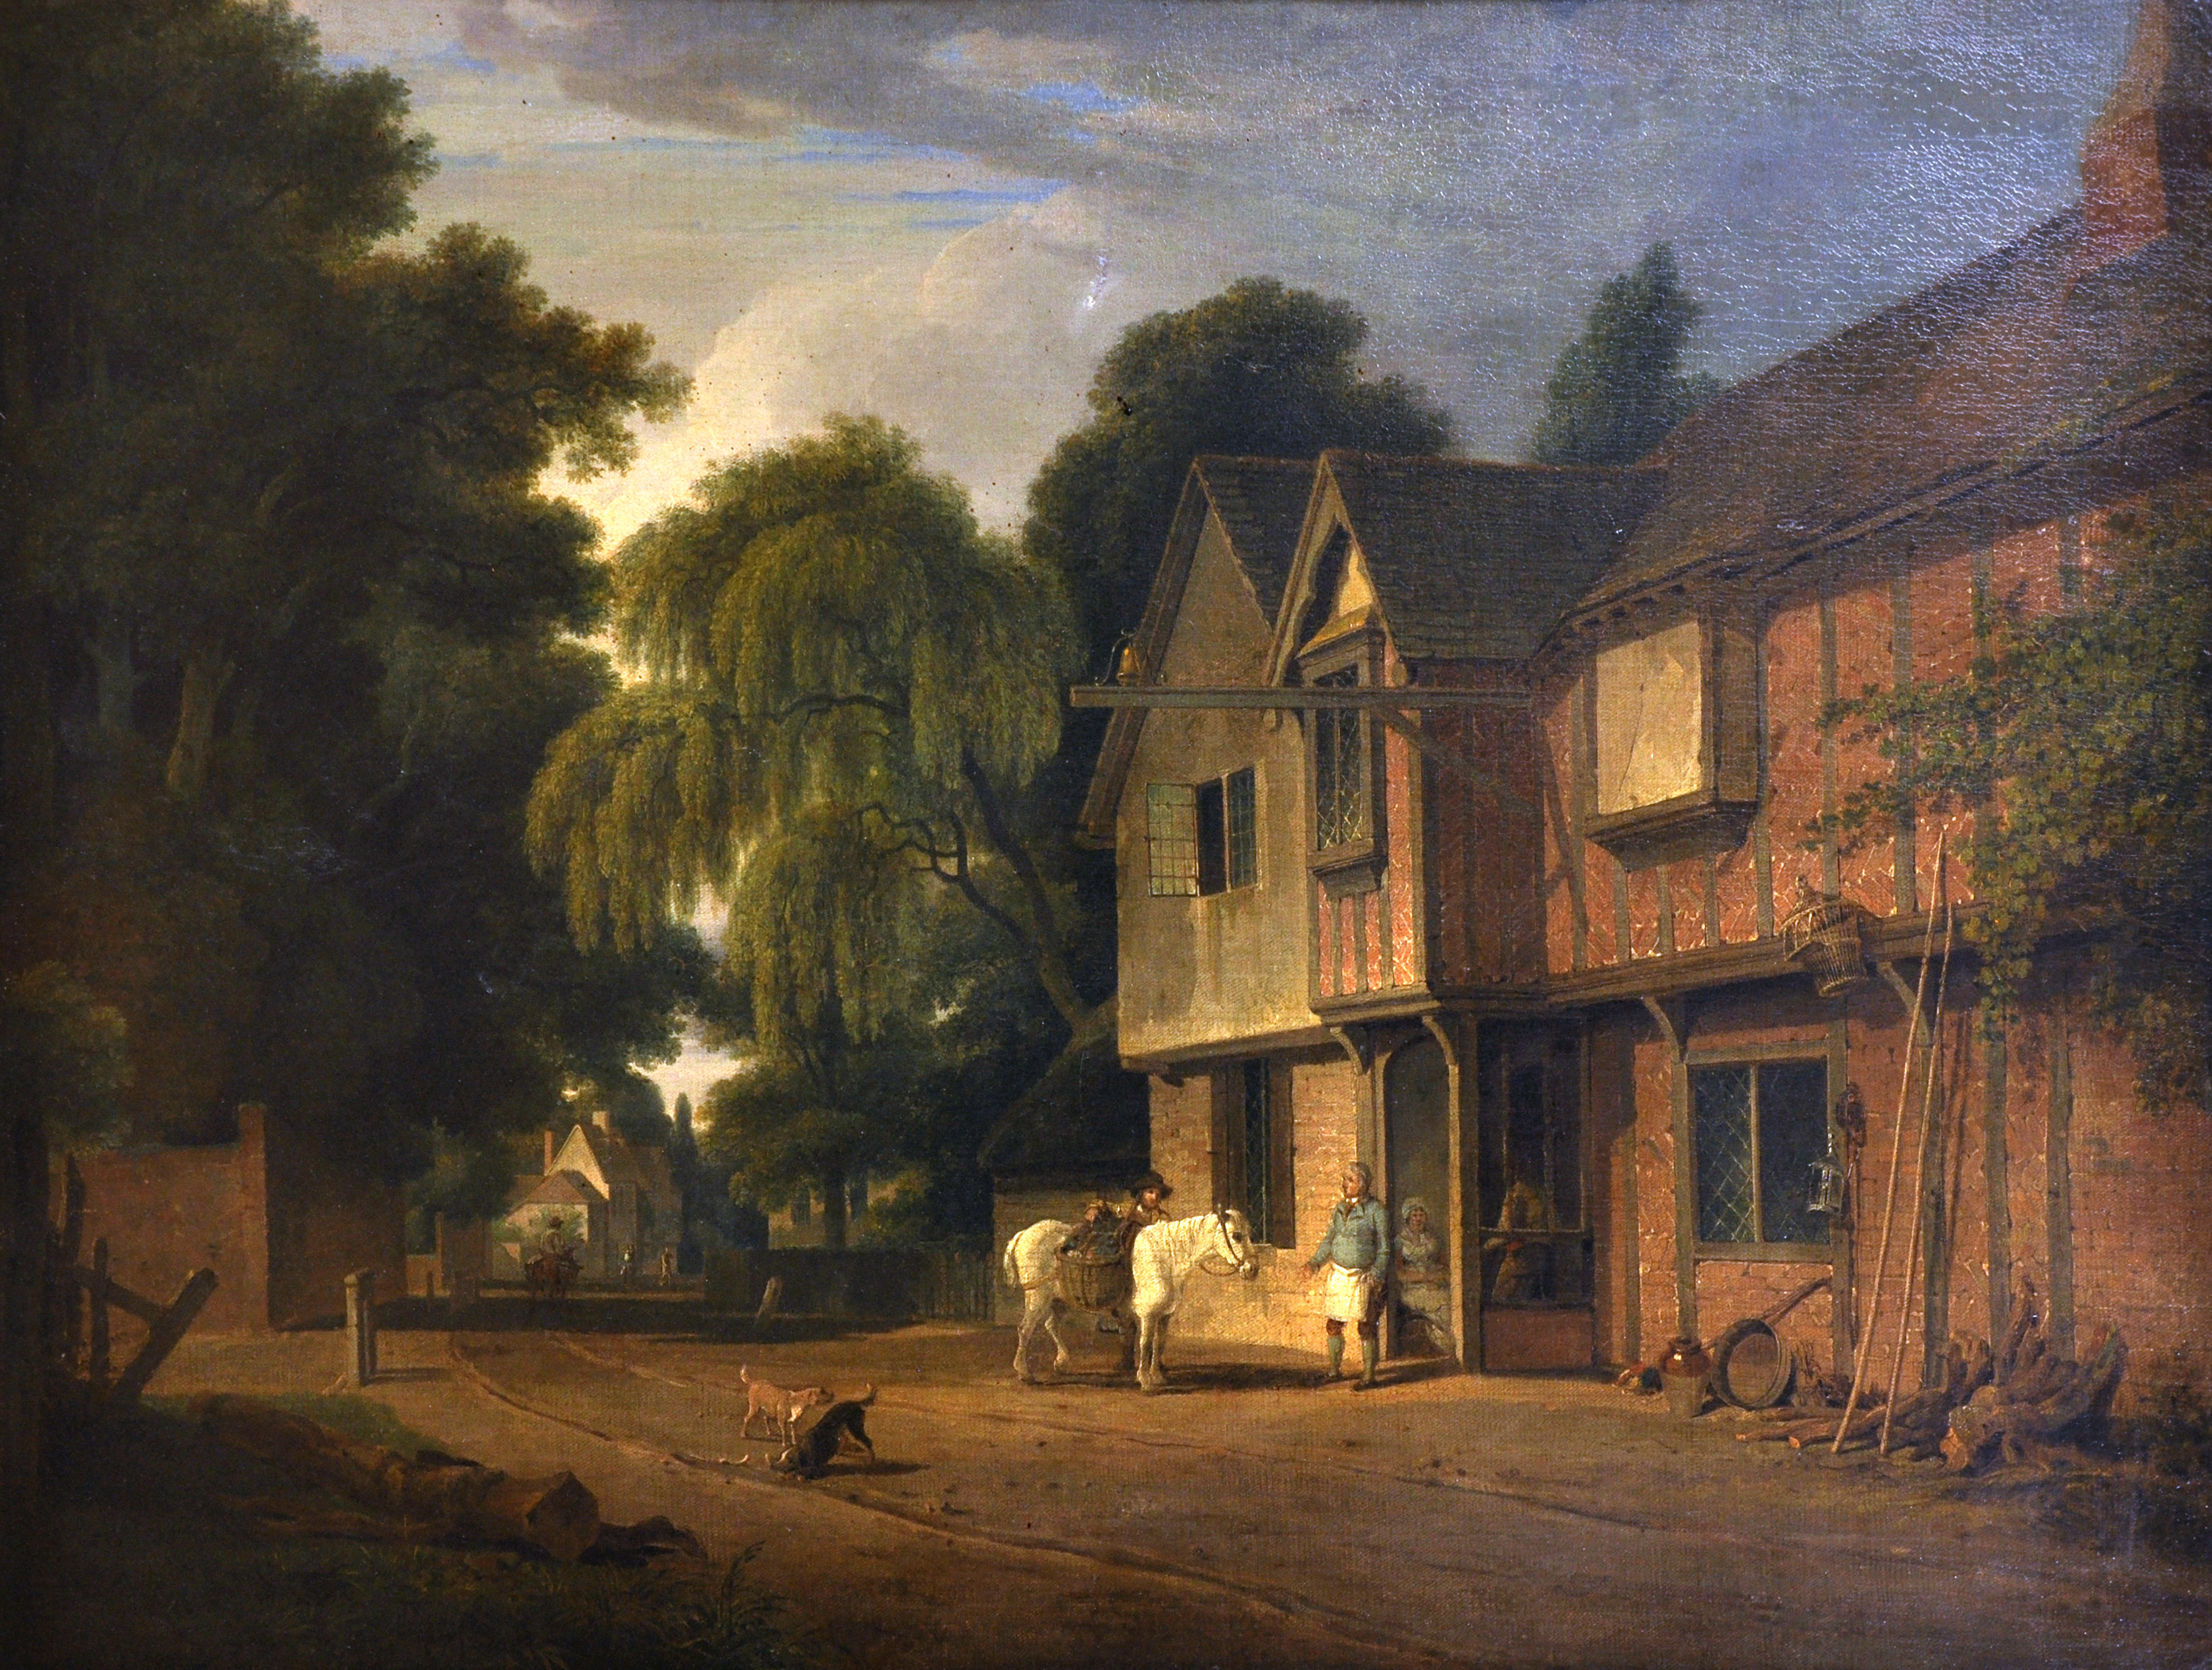 Andrew Wilson (1780-1848) British. “A View of The Bell Inn Hurley, Herts”, with Figures and Dogs